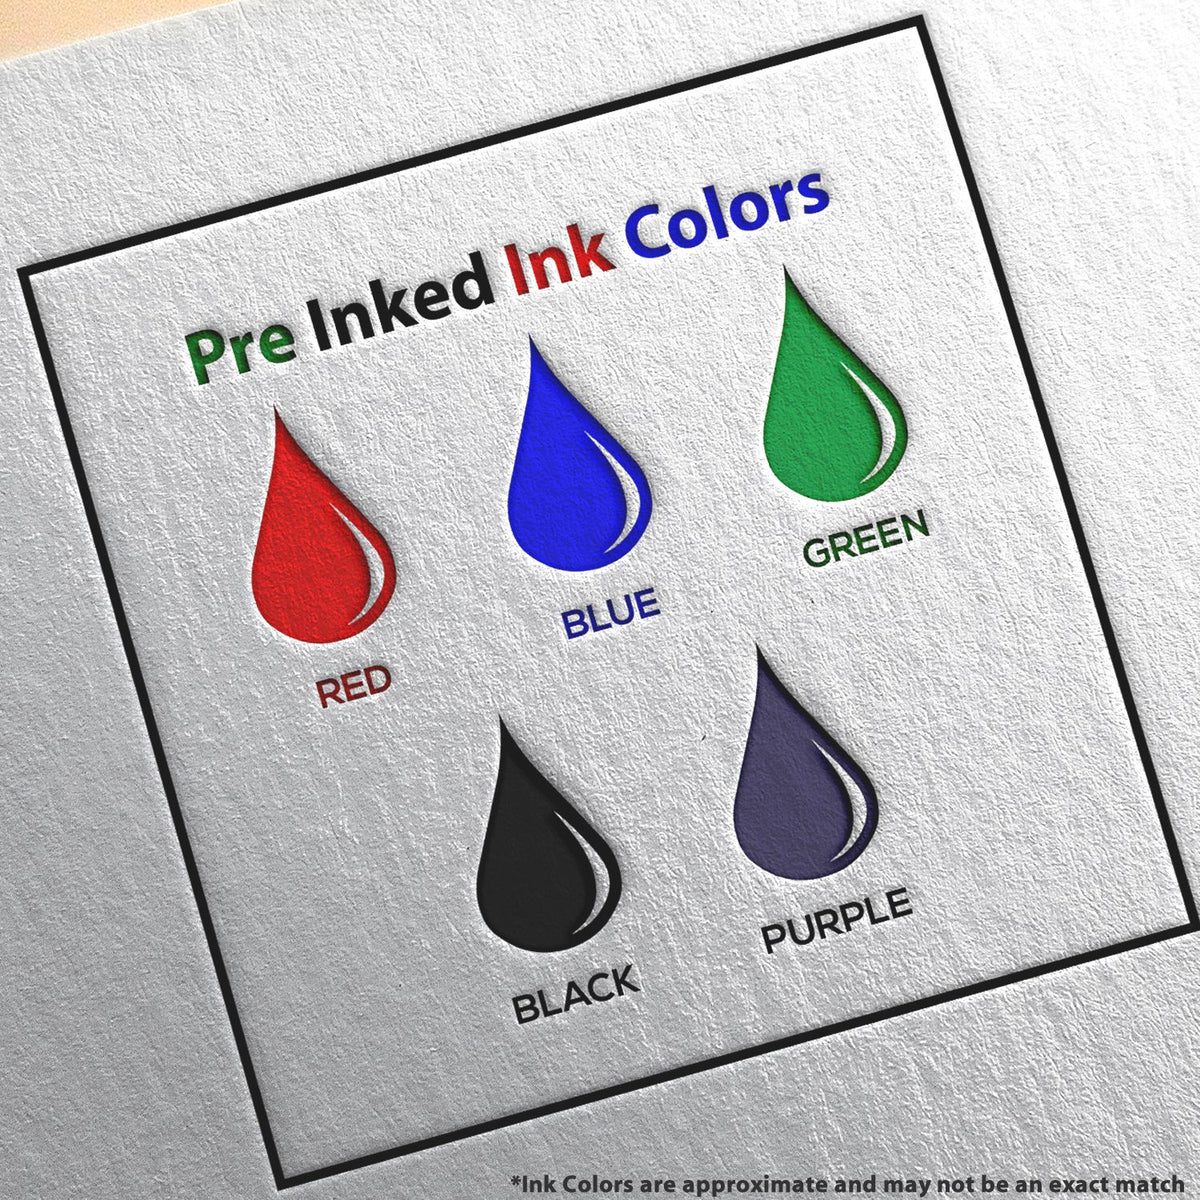 A picture showing the different ink colors or hues available for the Slim Pre-Inked Rectangular Notary Stamp for North Dakota product.